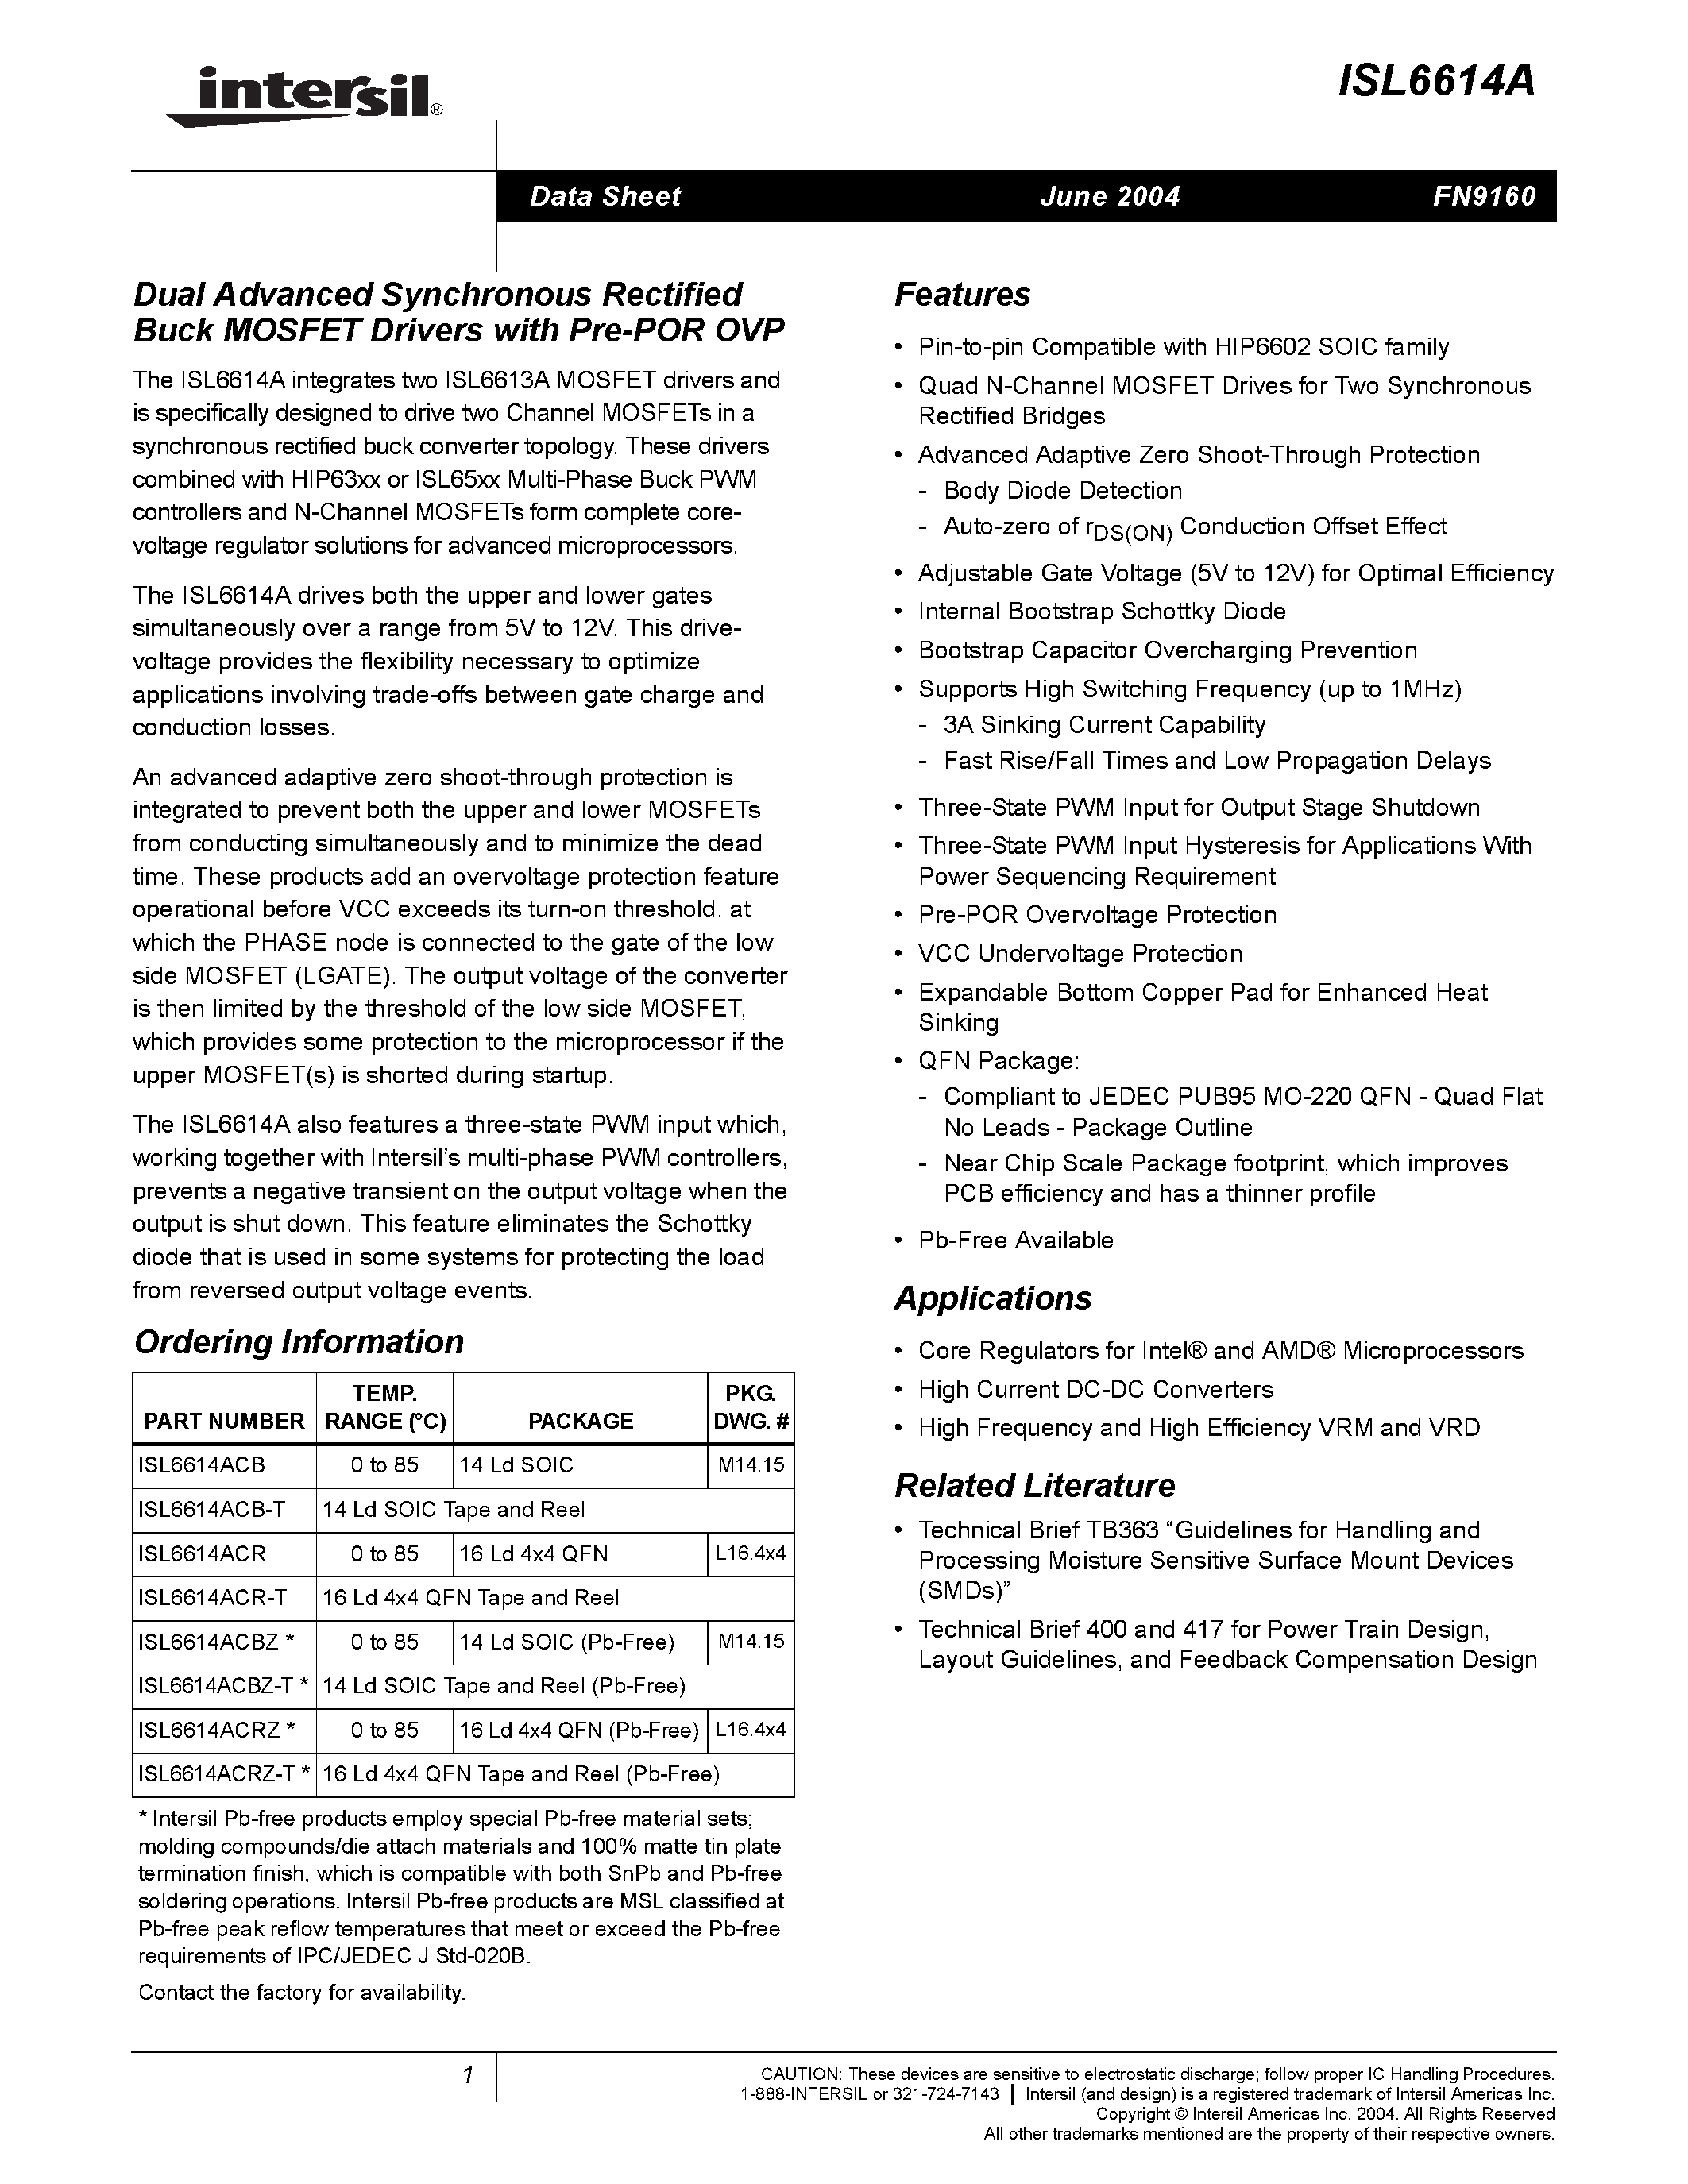 Datasheet ISL6614ACRZ - Dual Advanced Synchronous Rectified Buck MOSFET Drivers with Pre-POR OVP page 1